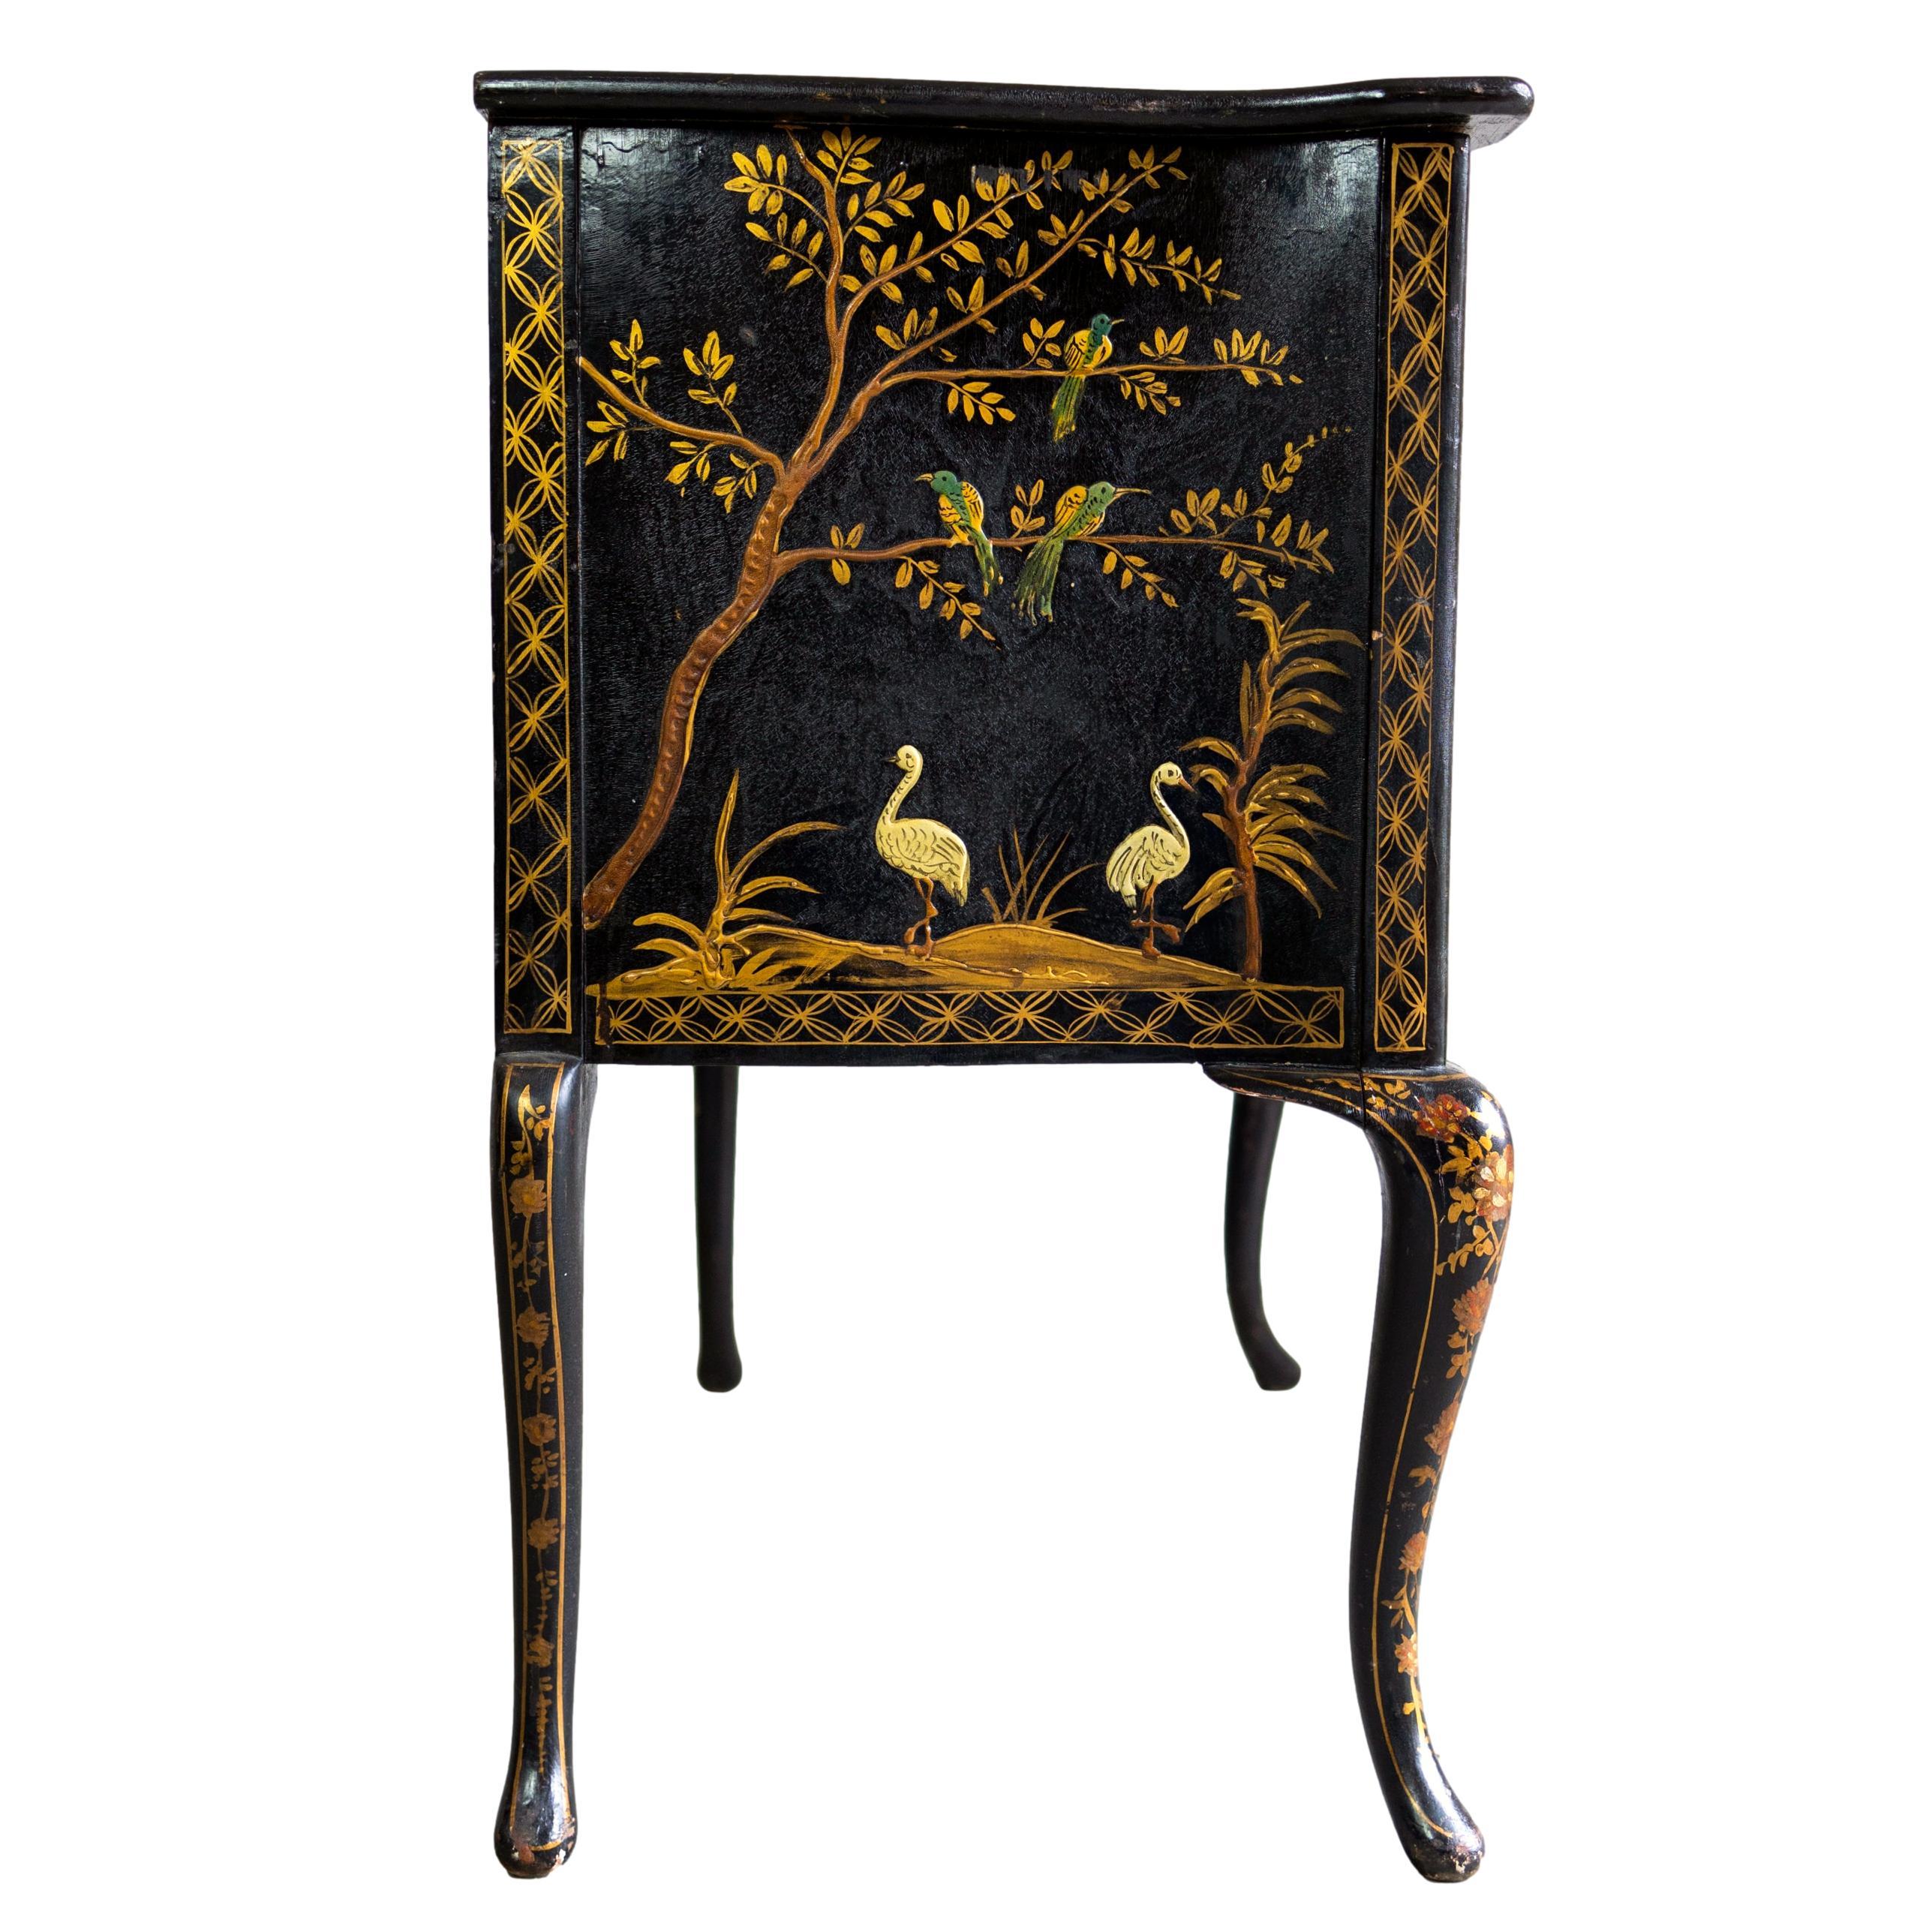 Regency Black Lacquered and Chinoiserie-Decorated Serpentine Cabinet, English, c. 1875